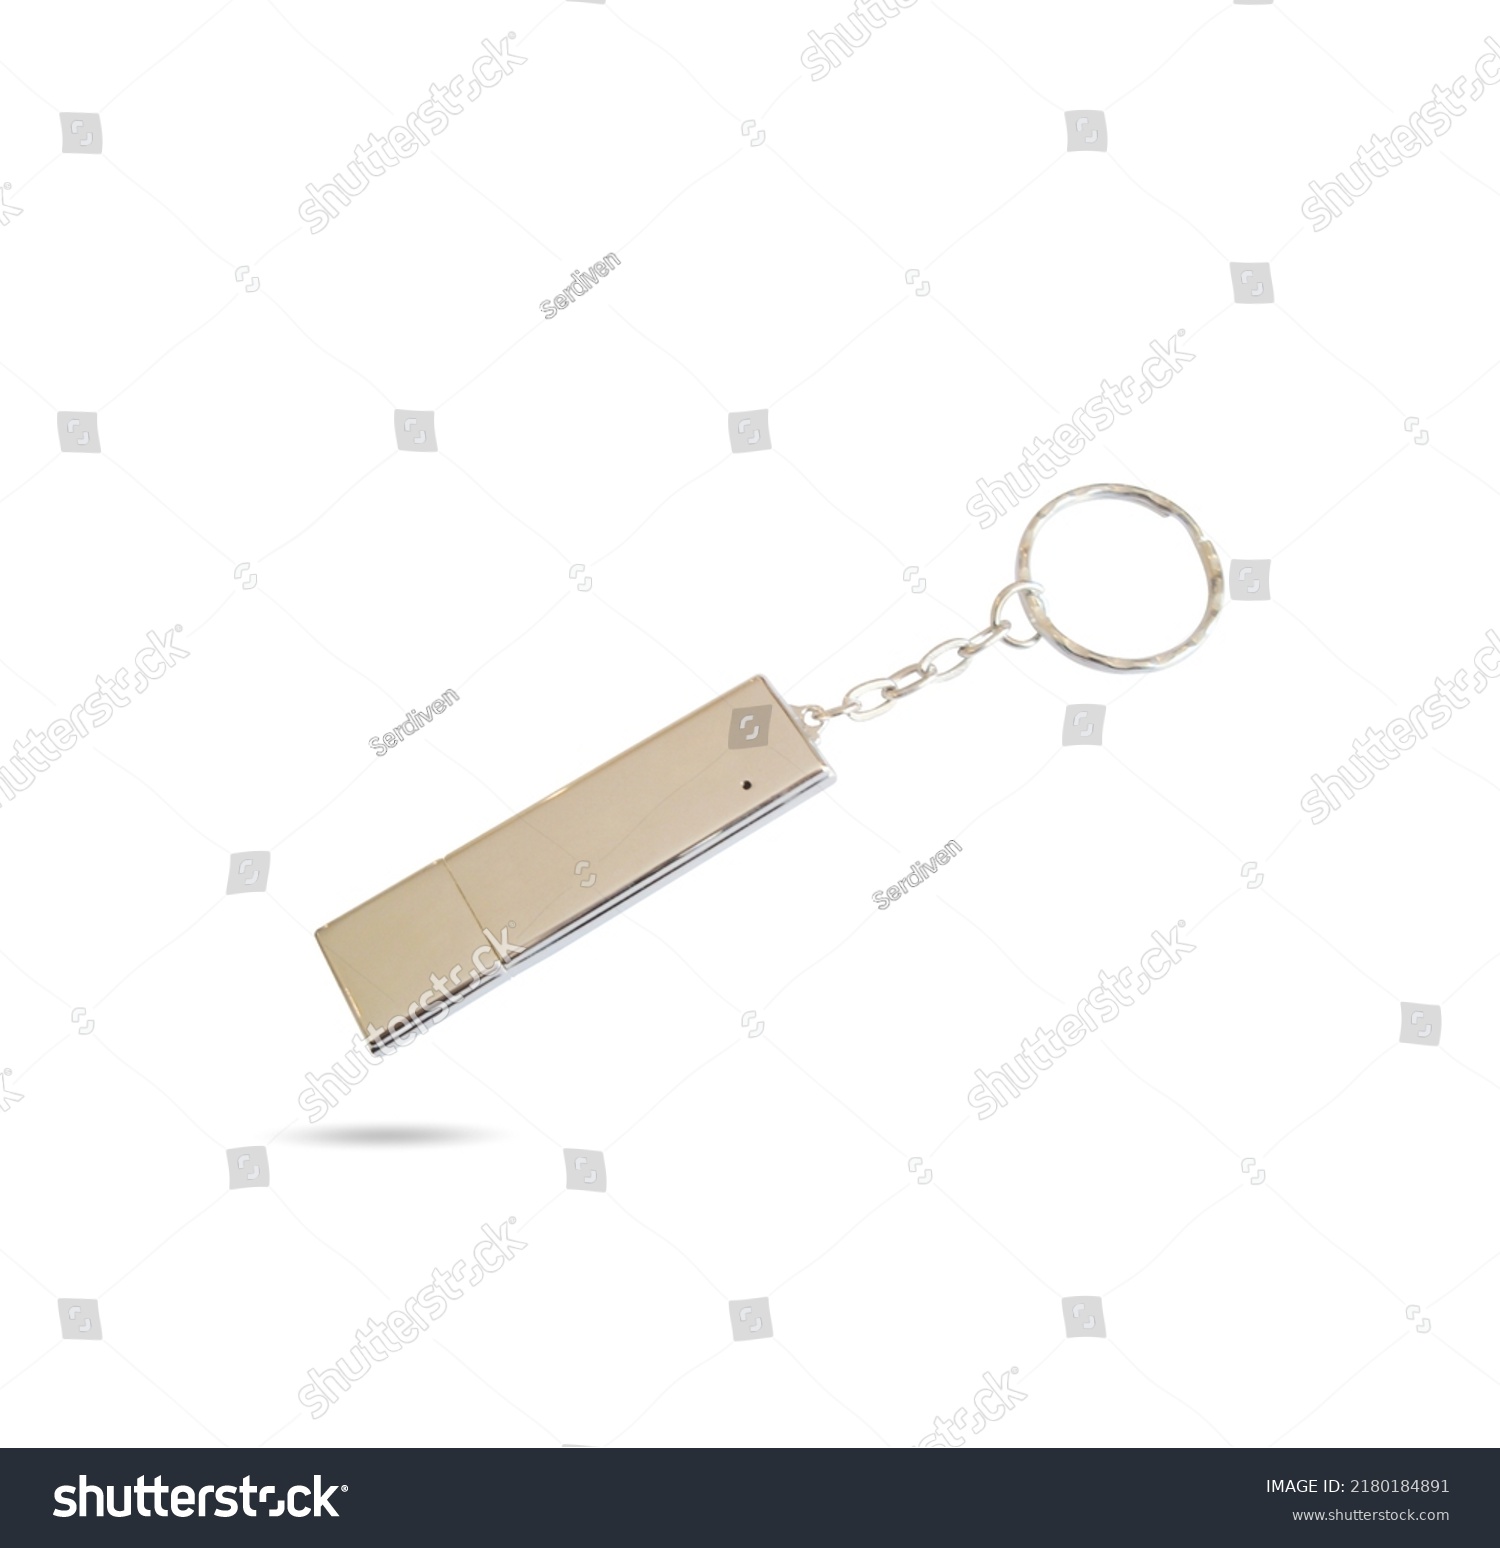 USB flash drive mockup isolated on branding background. Clean template blank gold metal surface. USB flash drive with keychain and key ring. #2180184891